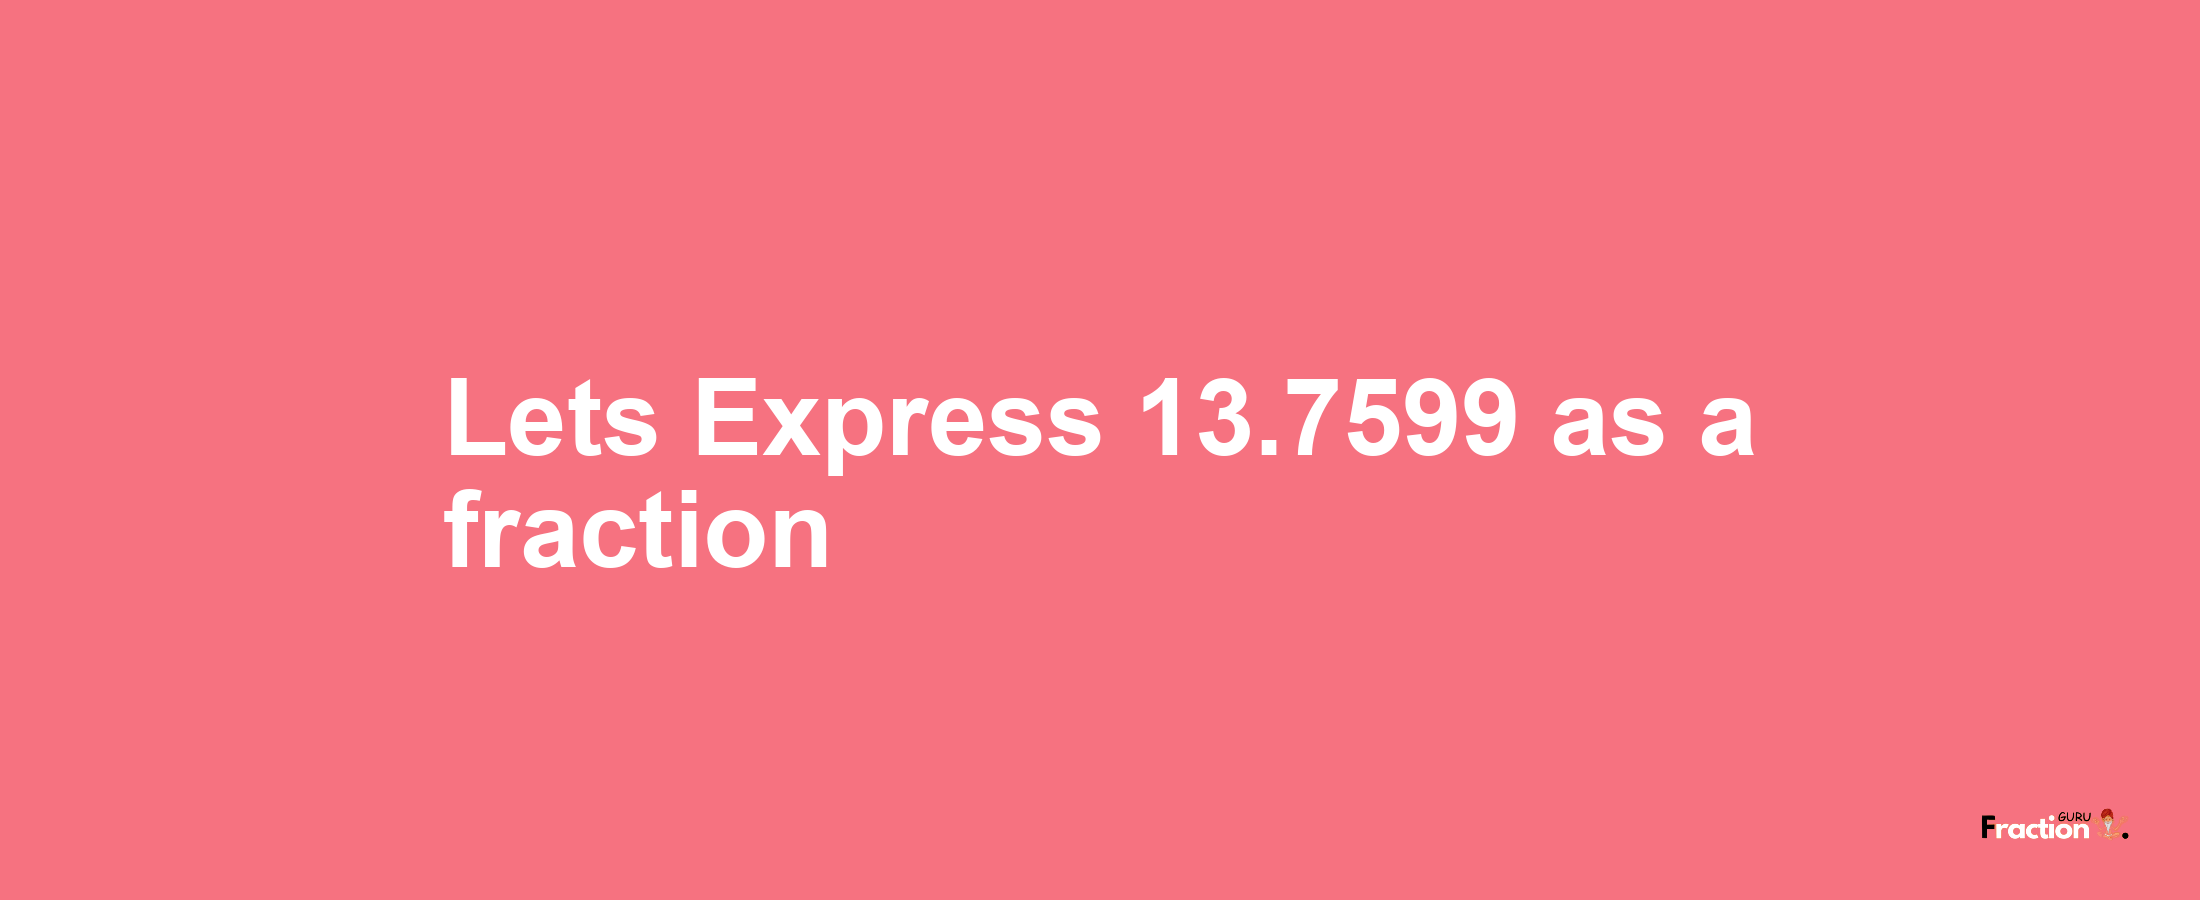 Lets Express 13.7599 as afraction